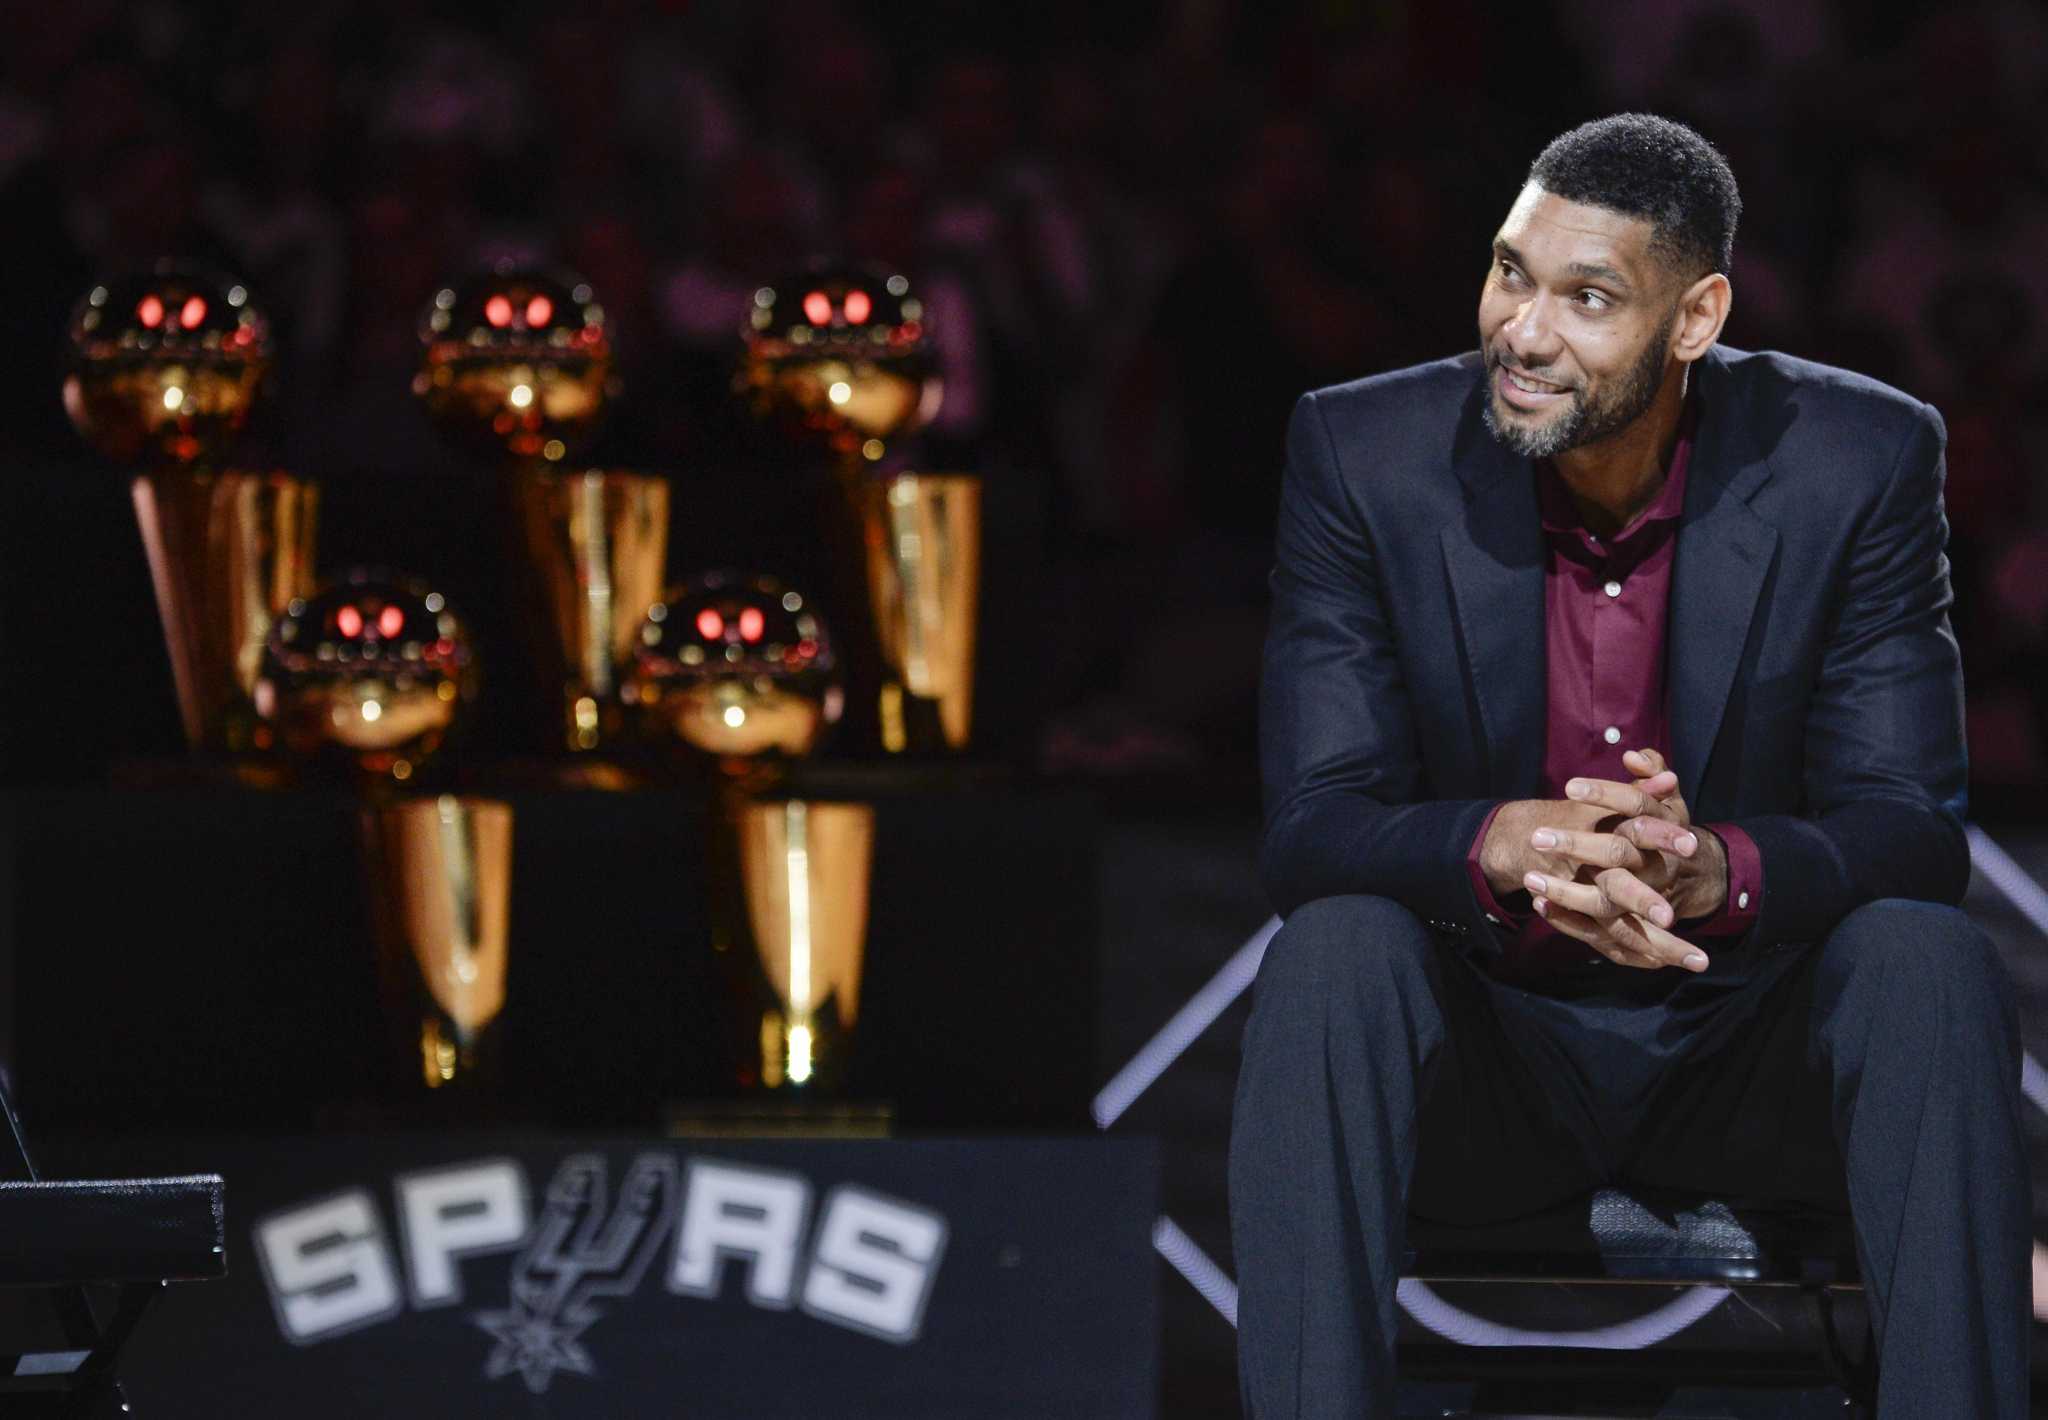 In Hall of Fame, Tim Duncan finds another perfect fit